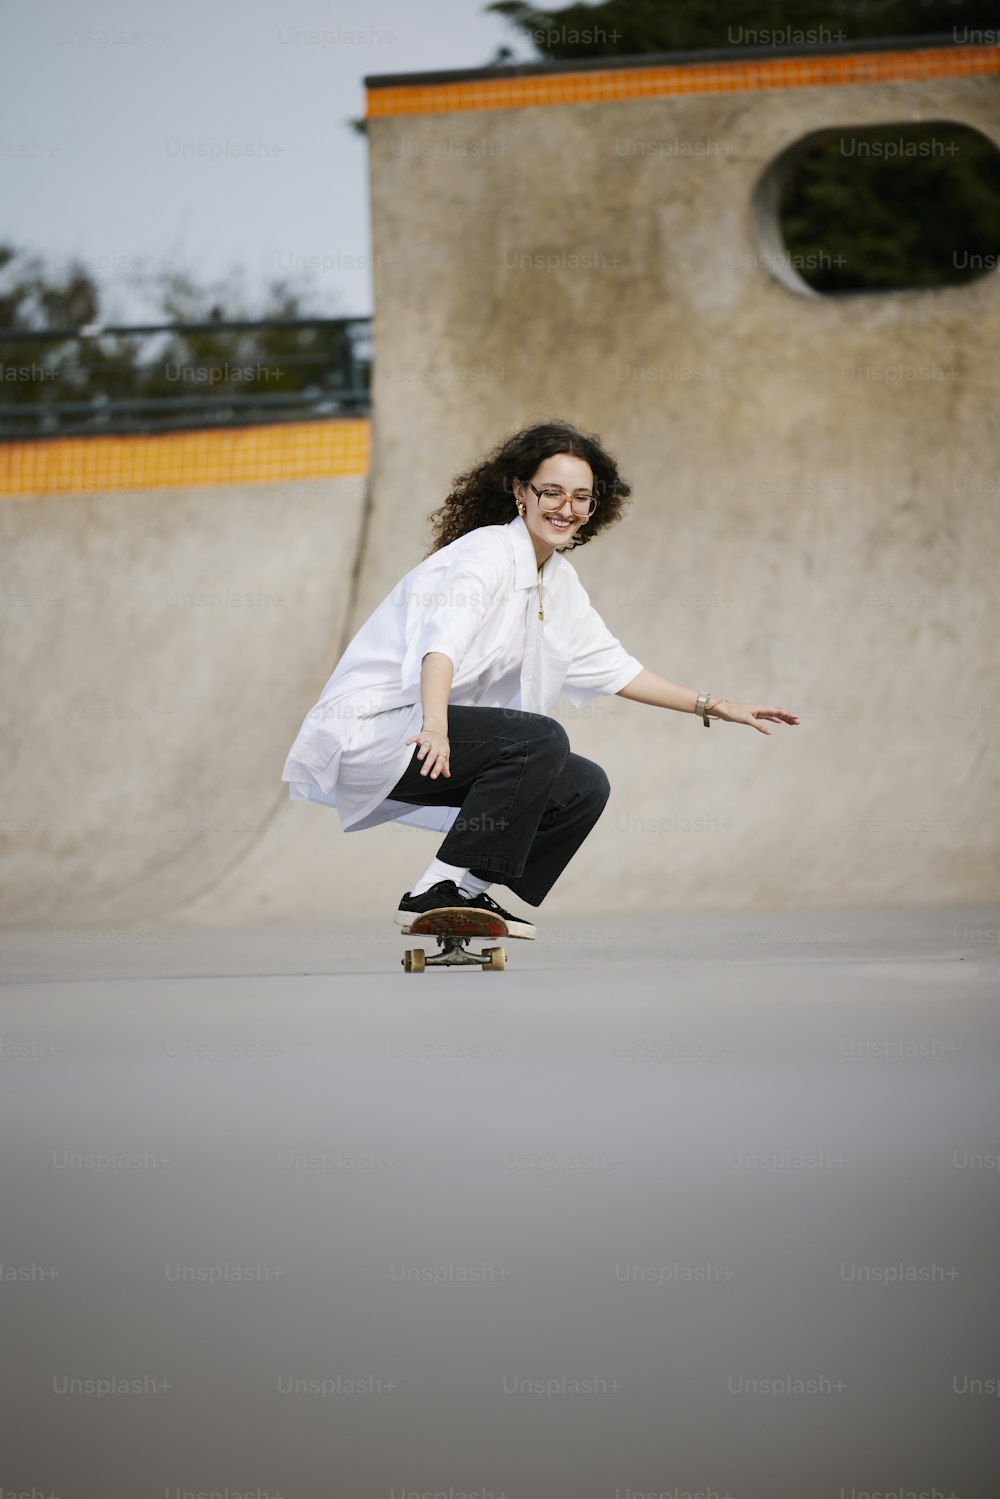 a woman riding a skateboard down the side of a ramp